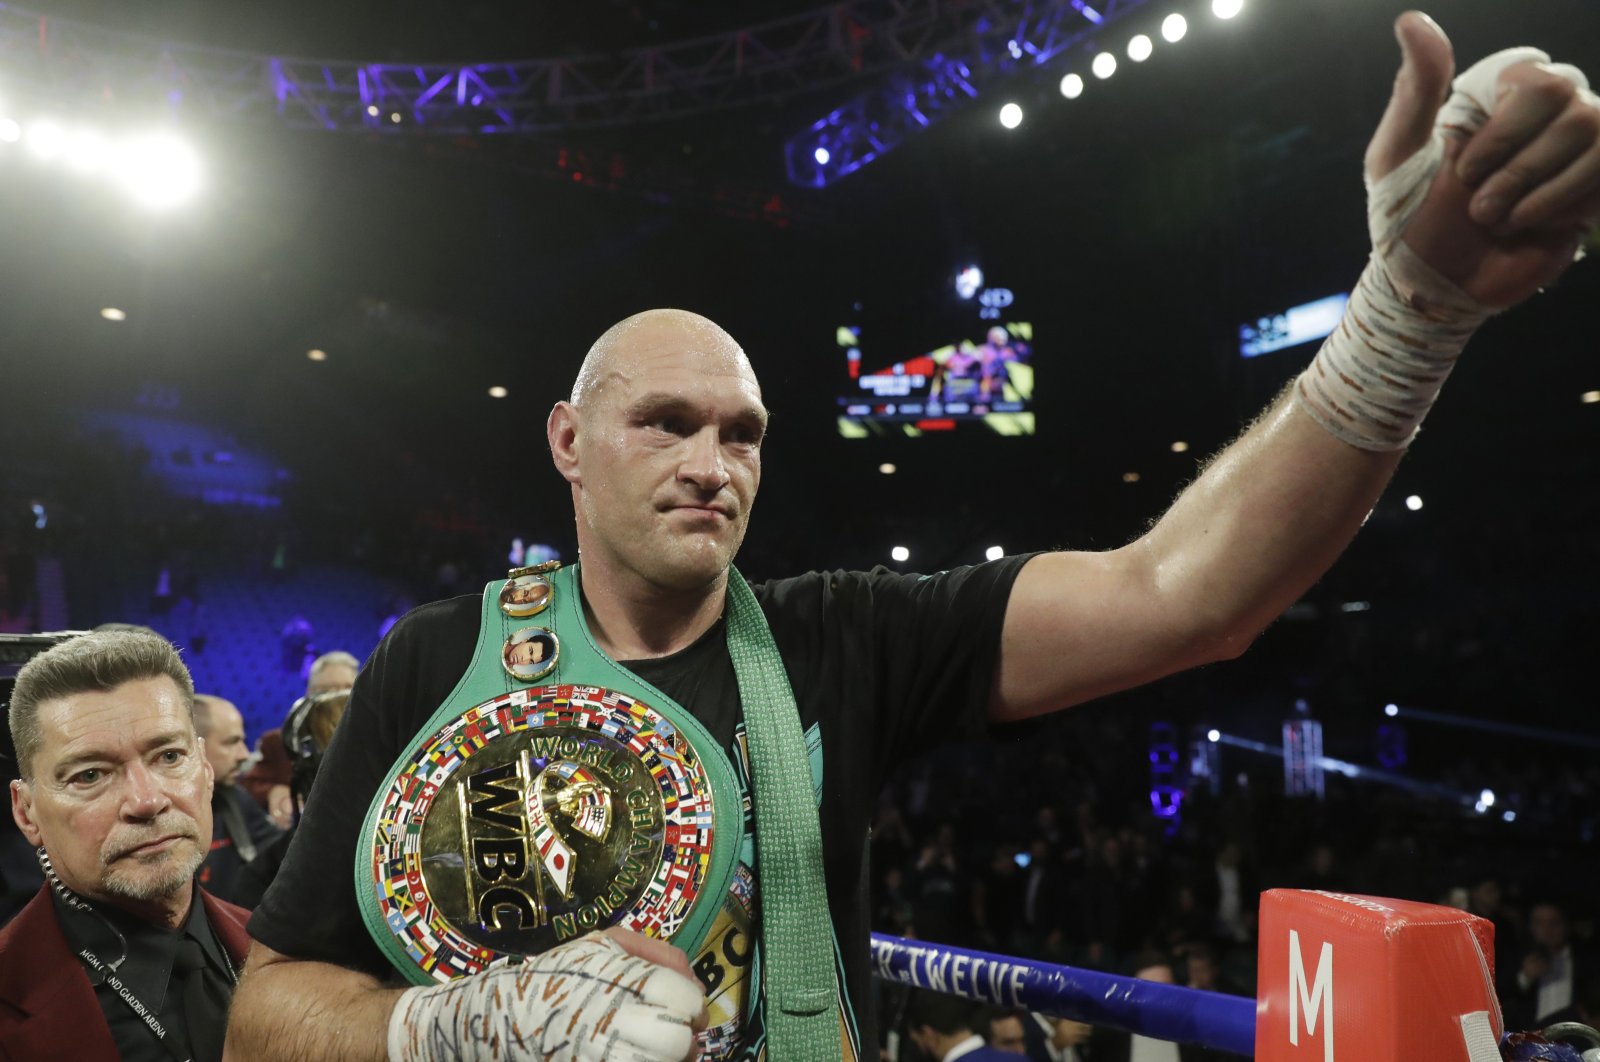 British boxer Tyson Fury celebrates after defeating Deontay Wilder during a WBC heavyweight championship boxing match in Las Vegas, U.S., Feb. 22, 2020. (AP Photo)